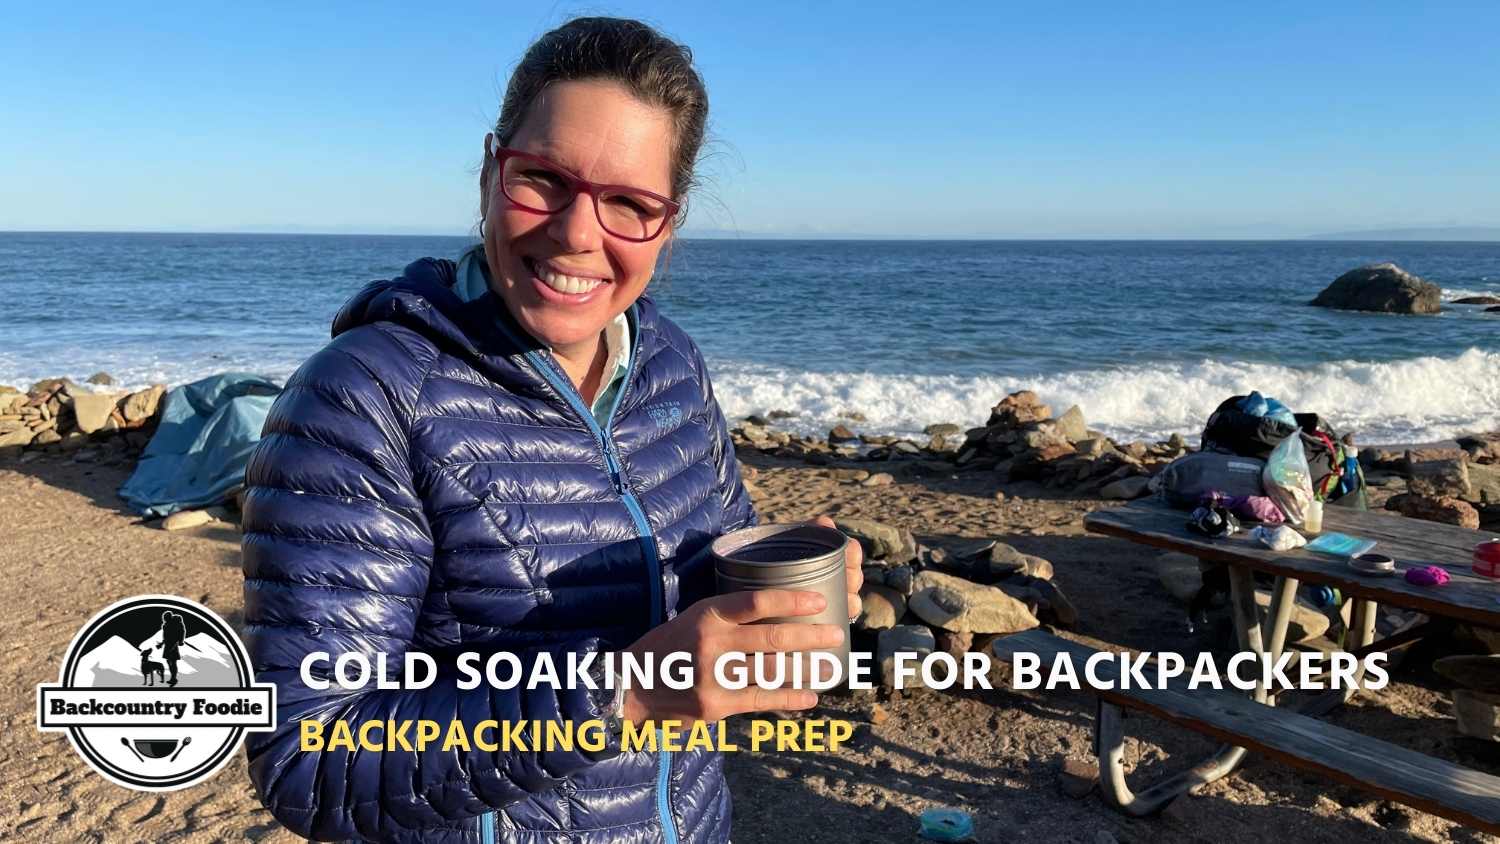 This how-to cold soaking guide written by backpacking dietitians shares our favorite tips, which foods that cold soak well and which don't, cold soaking-friendly containers, and six of our favorite cold soak recipes. You can find 200+ more DIY backpacking recipes like these on our website backcountryfoodie.com. #backpackingfoodnocook #backpackingfoodideas #backpackingrecipescoldsoak #backcountryfoodie